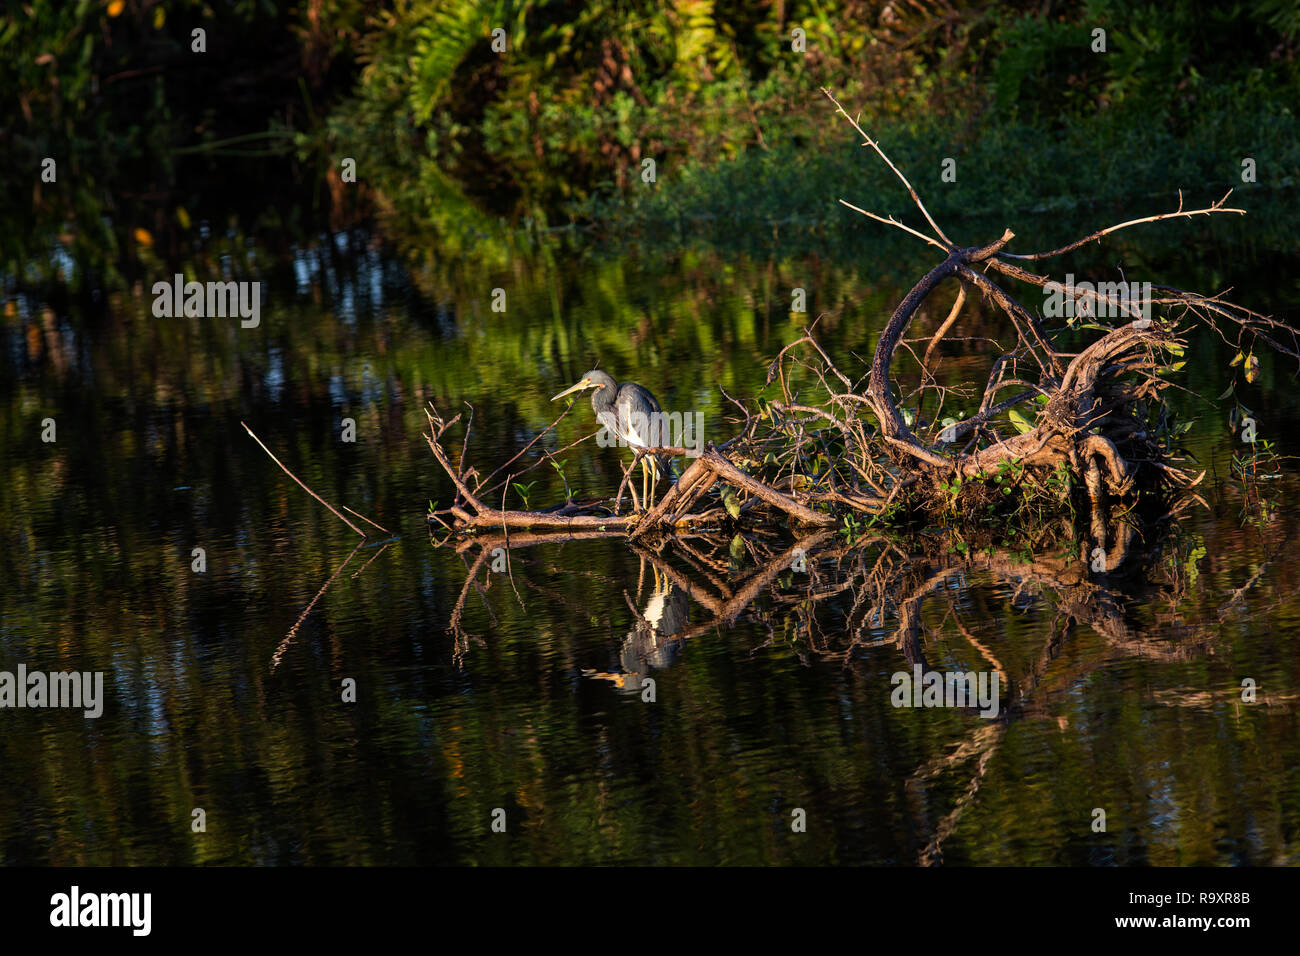 Louisiana Heron aka Tricolor Heron (Egretta tricolor) stands on a fallen limb in a Florida wetland with late day reflection in a tranquil scene Stock Photo